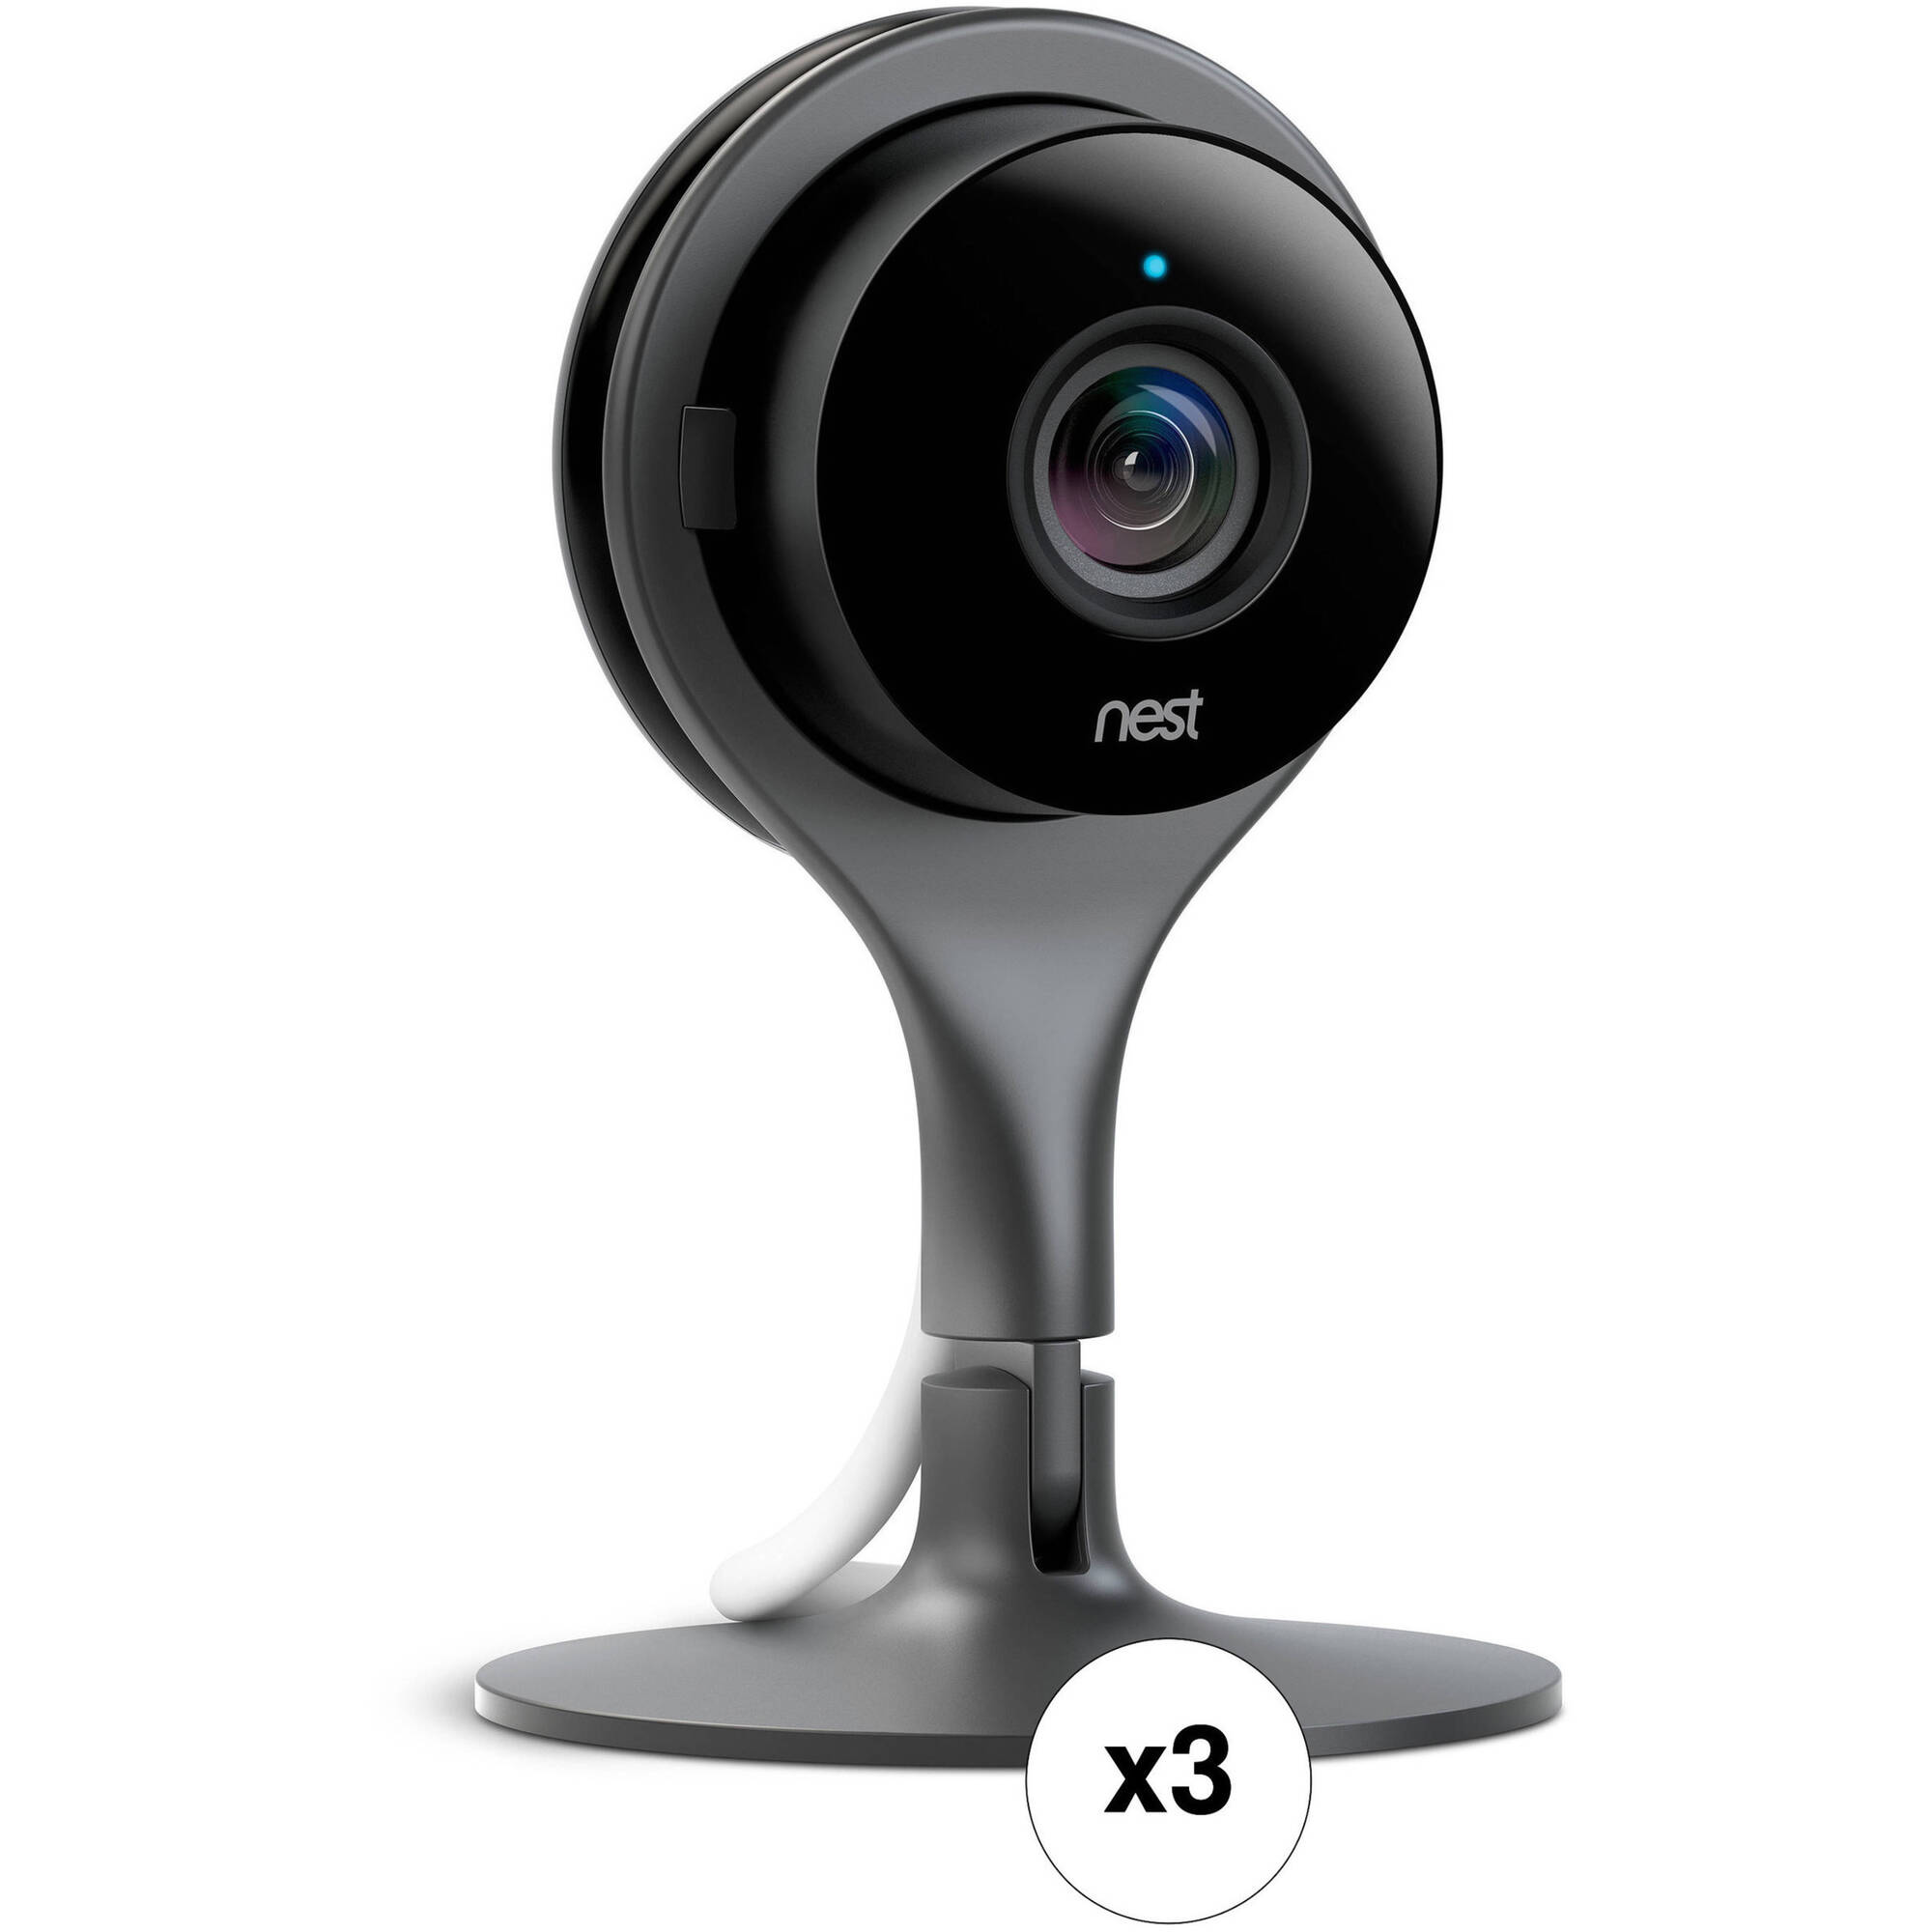 moving nest camera to new wifi